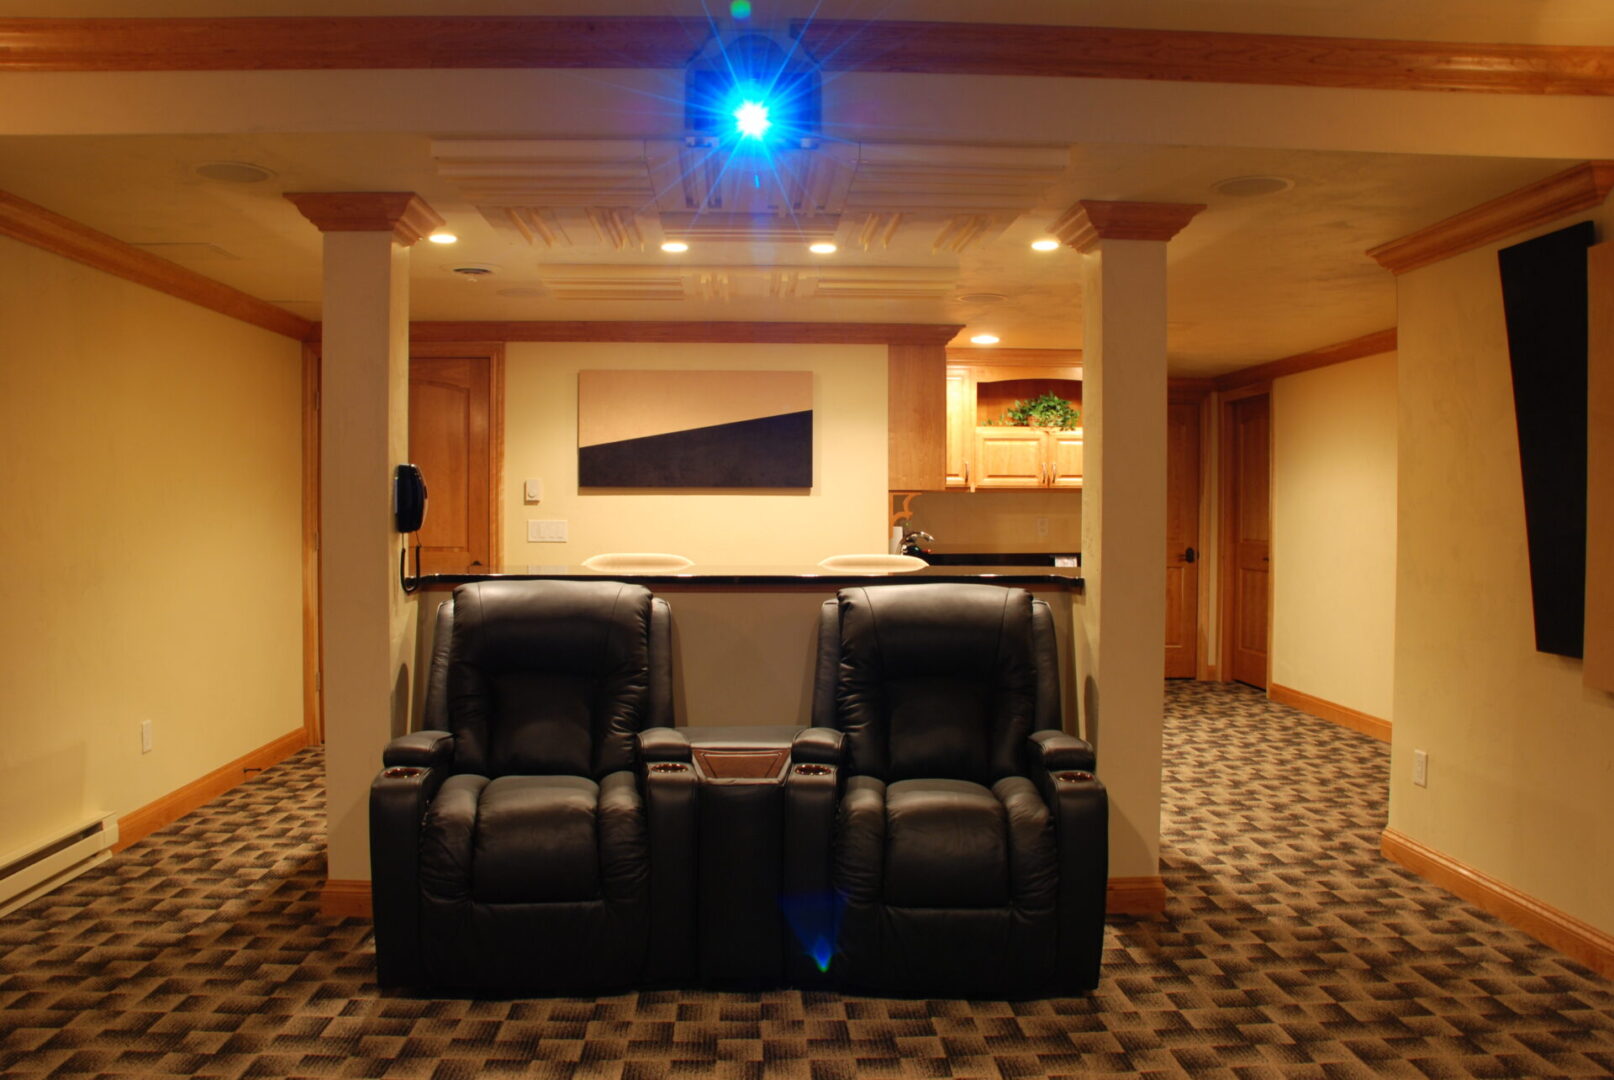 A media projector on above reclining seats in a home theater